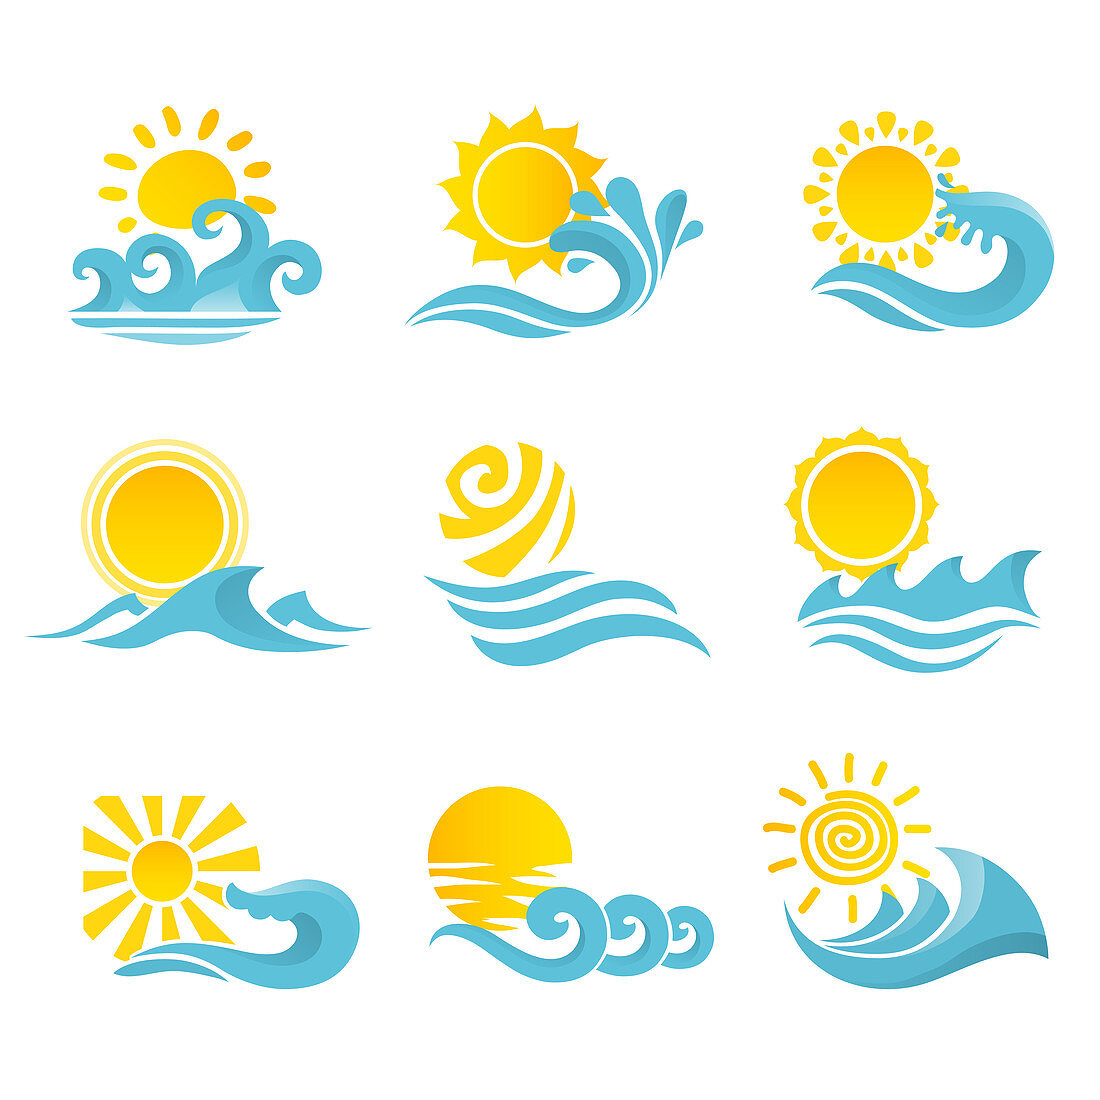 Sun and wave icons, illustration